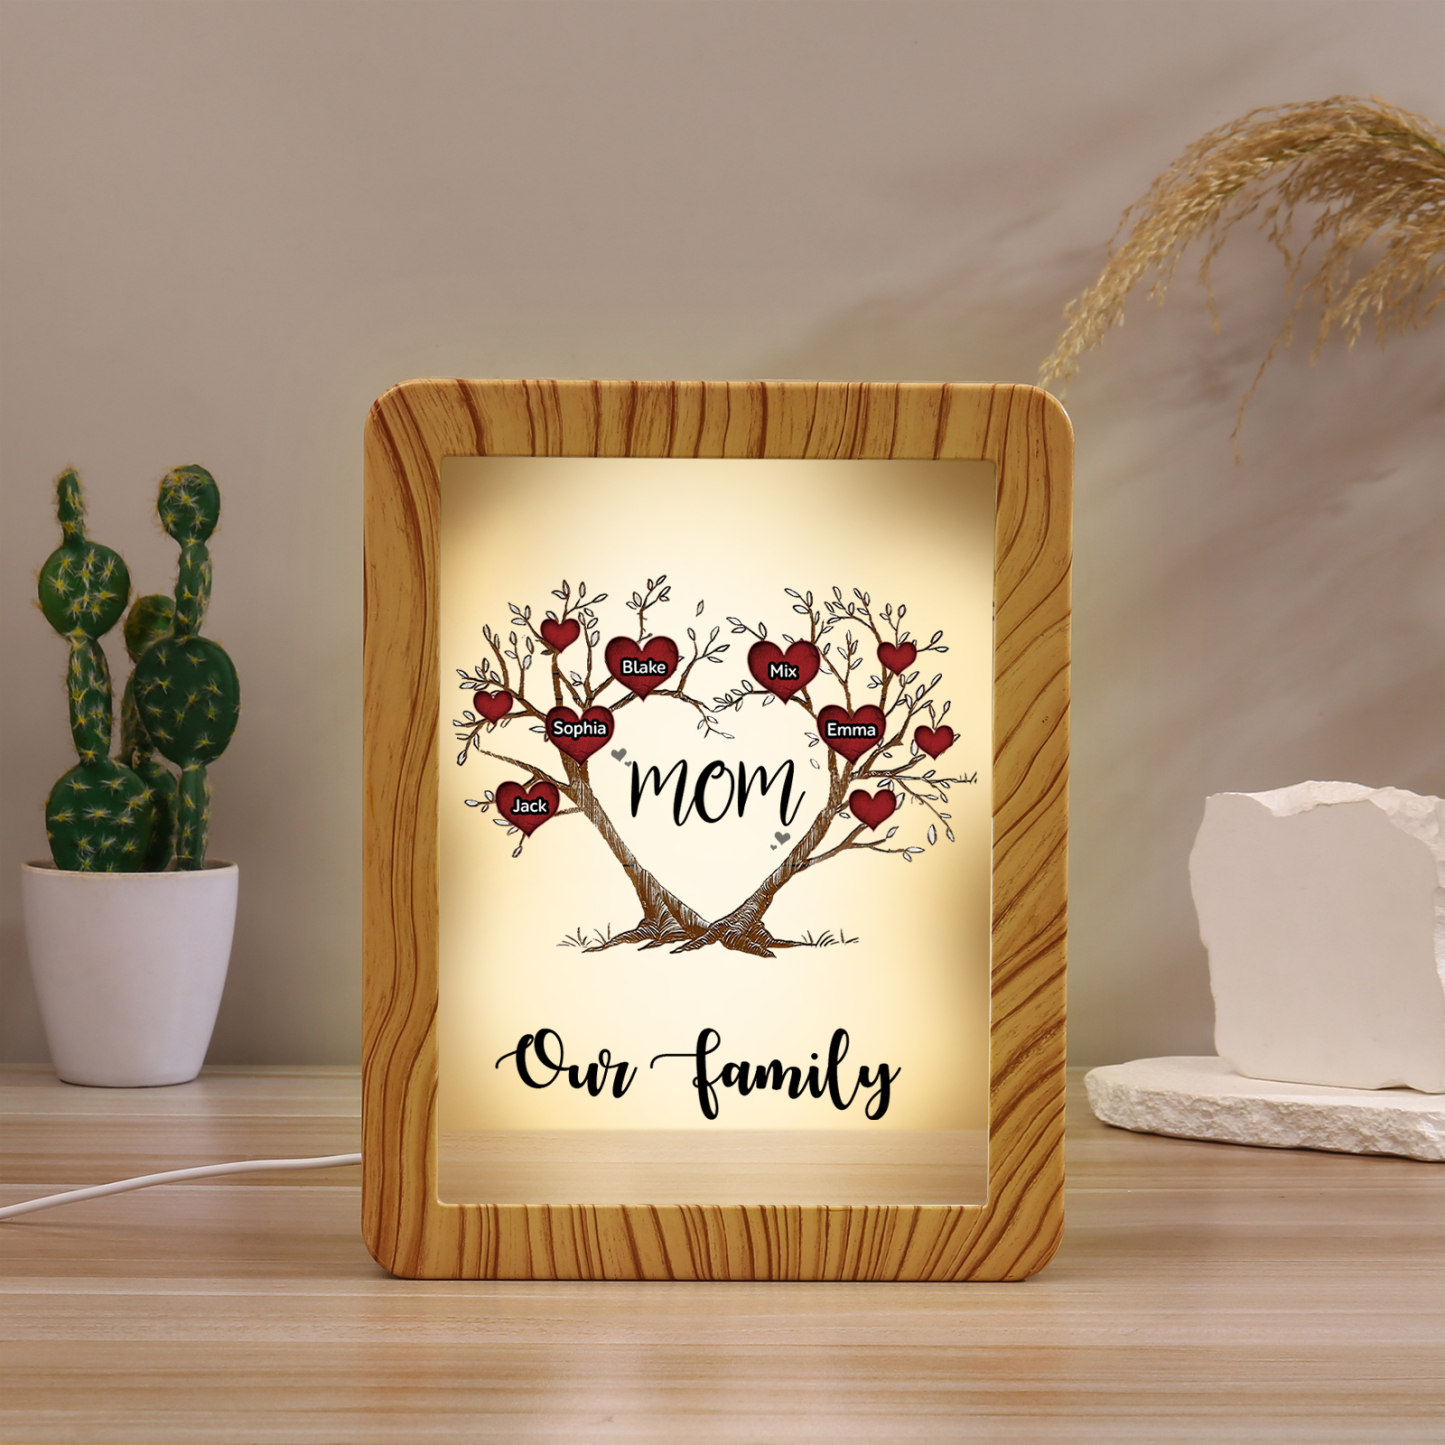 5 Names - Personalized Home Mirror Photo Frame Night Light Insert/Rechargeable Custom Text LED Night Light Gift for Mom